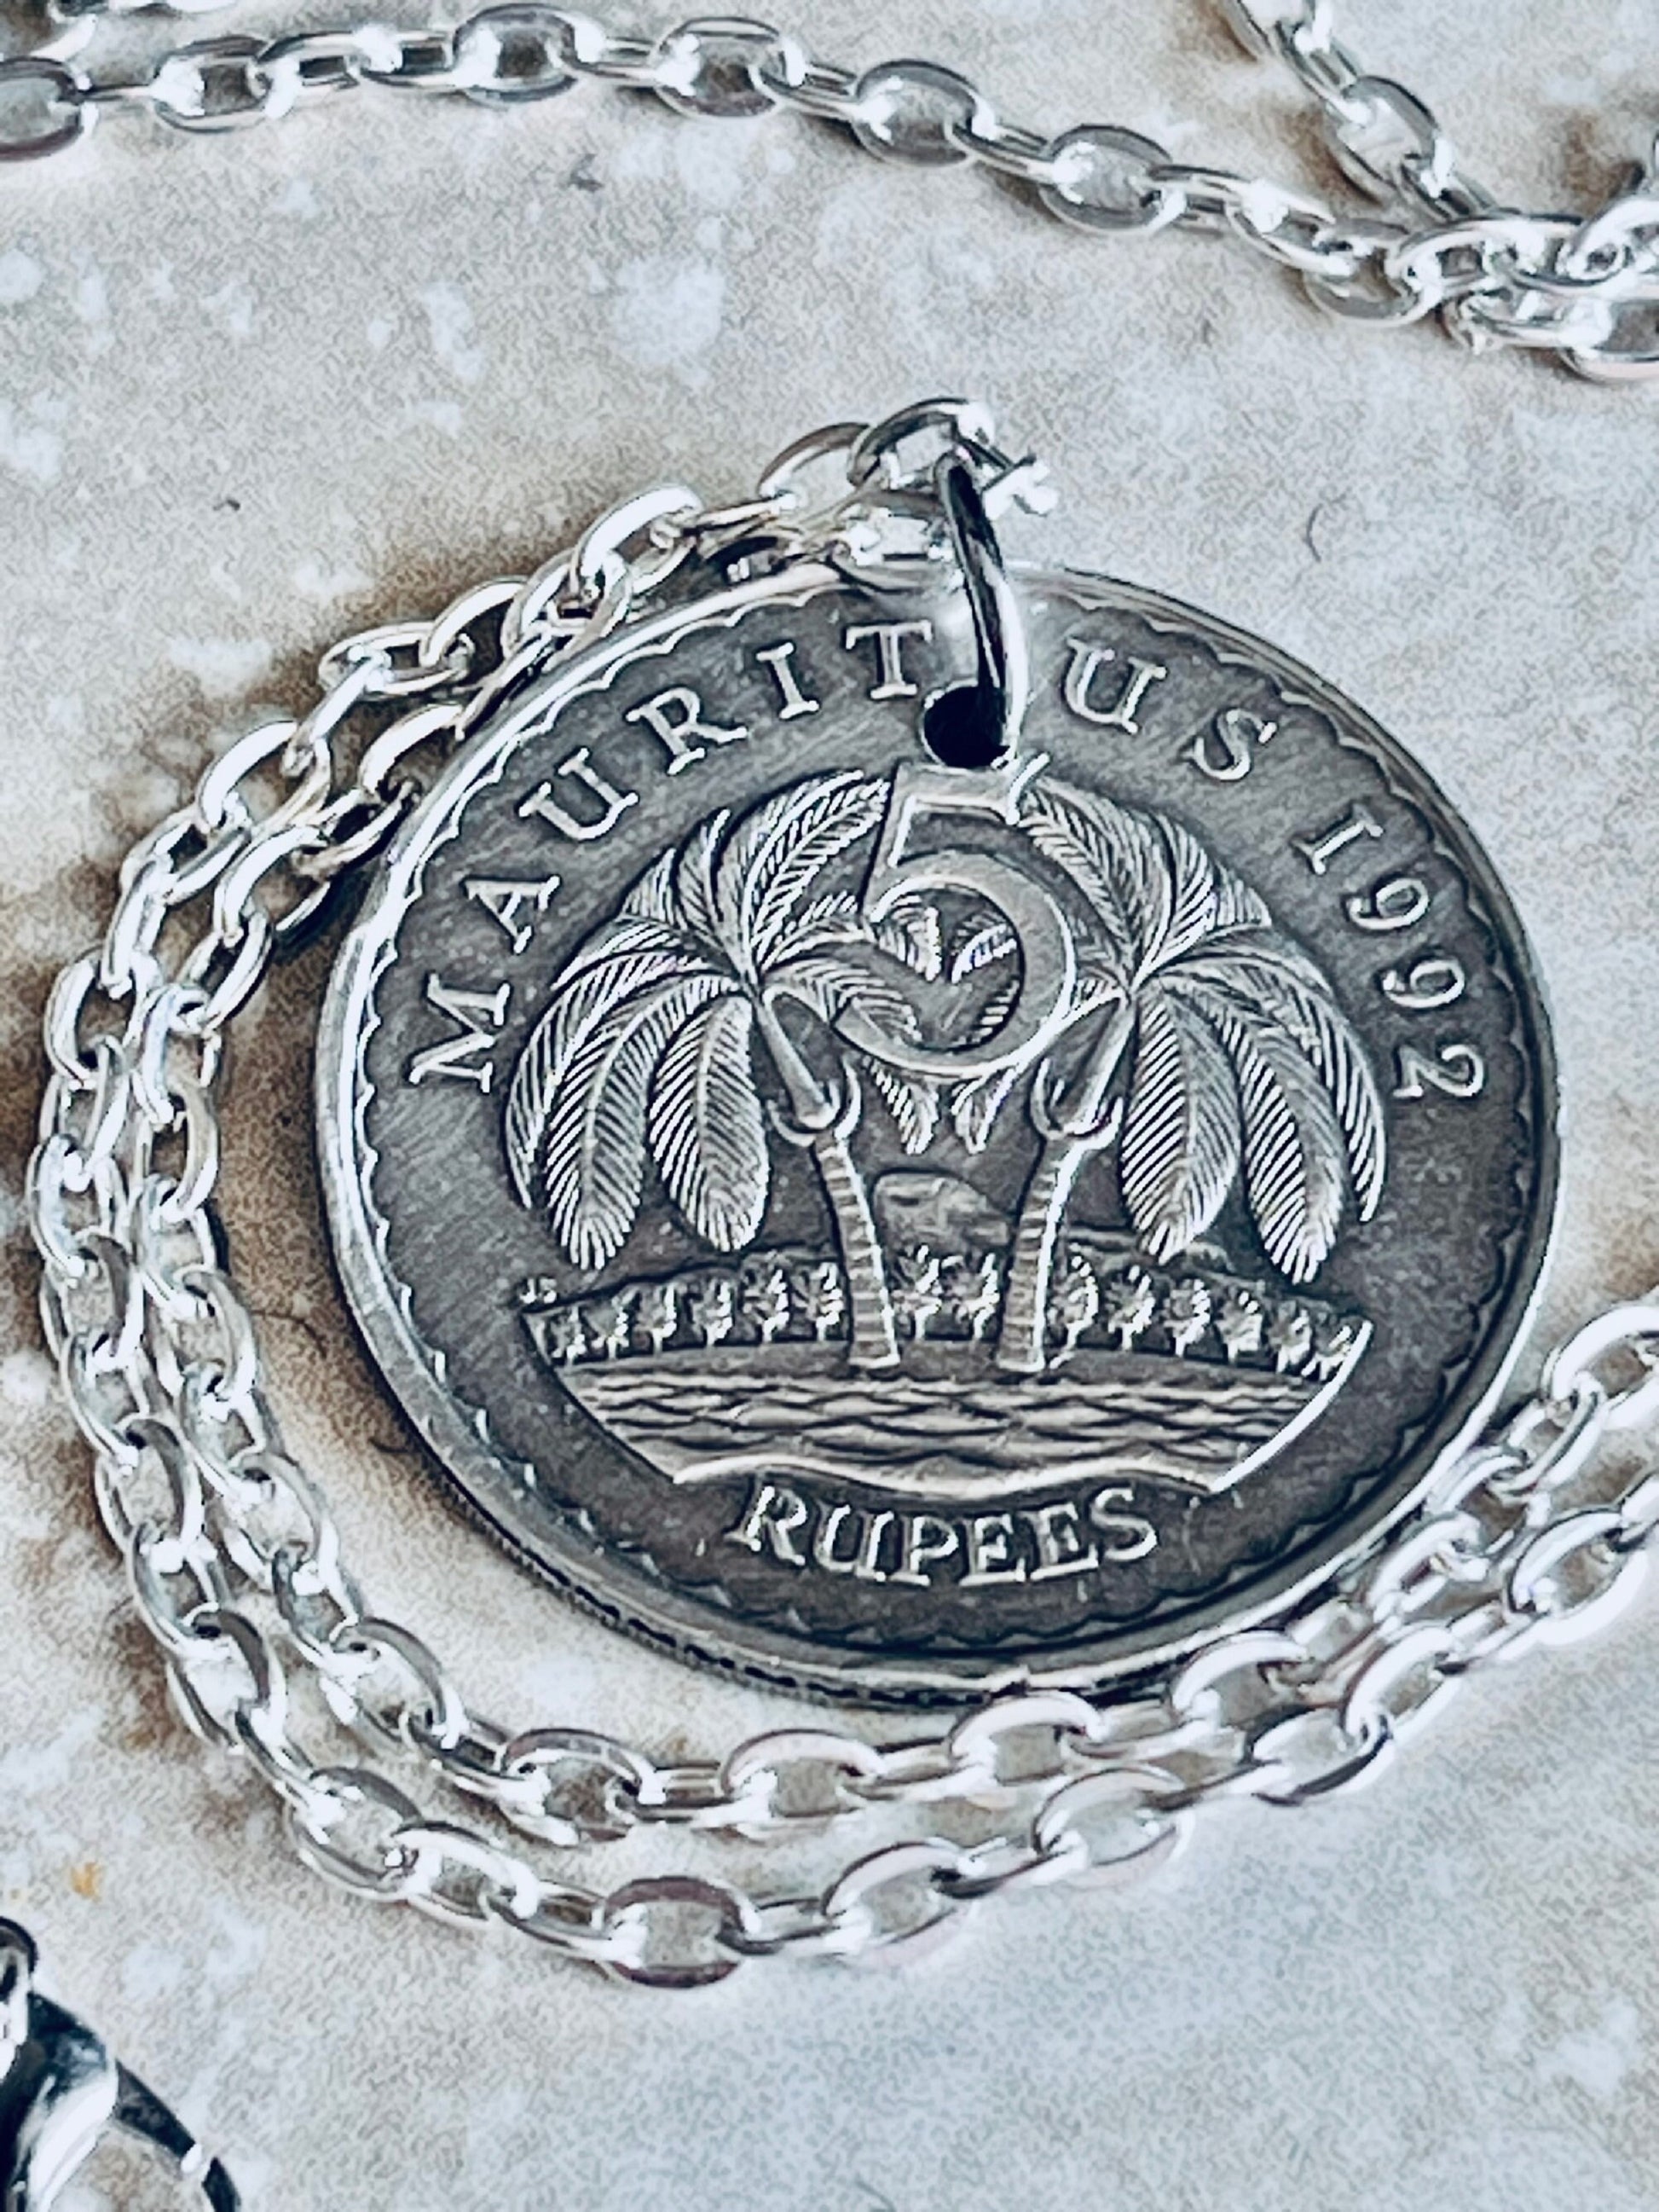 Mauritius Coin Pendant Five Rupee Coin Personal Necklace Old Vintage Handmade Jewelry Gift Friend Charm For Him Her World Coin Collector